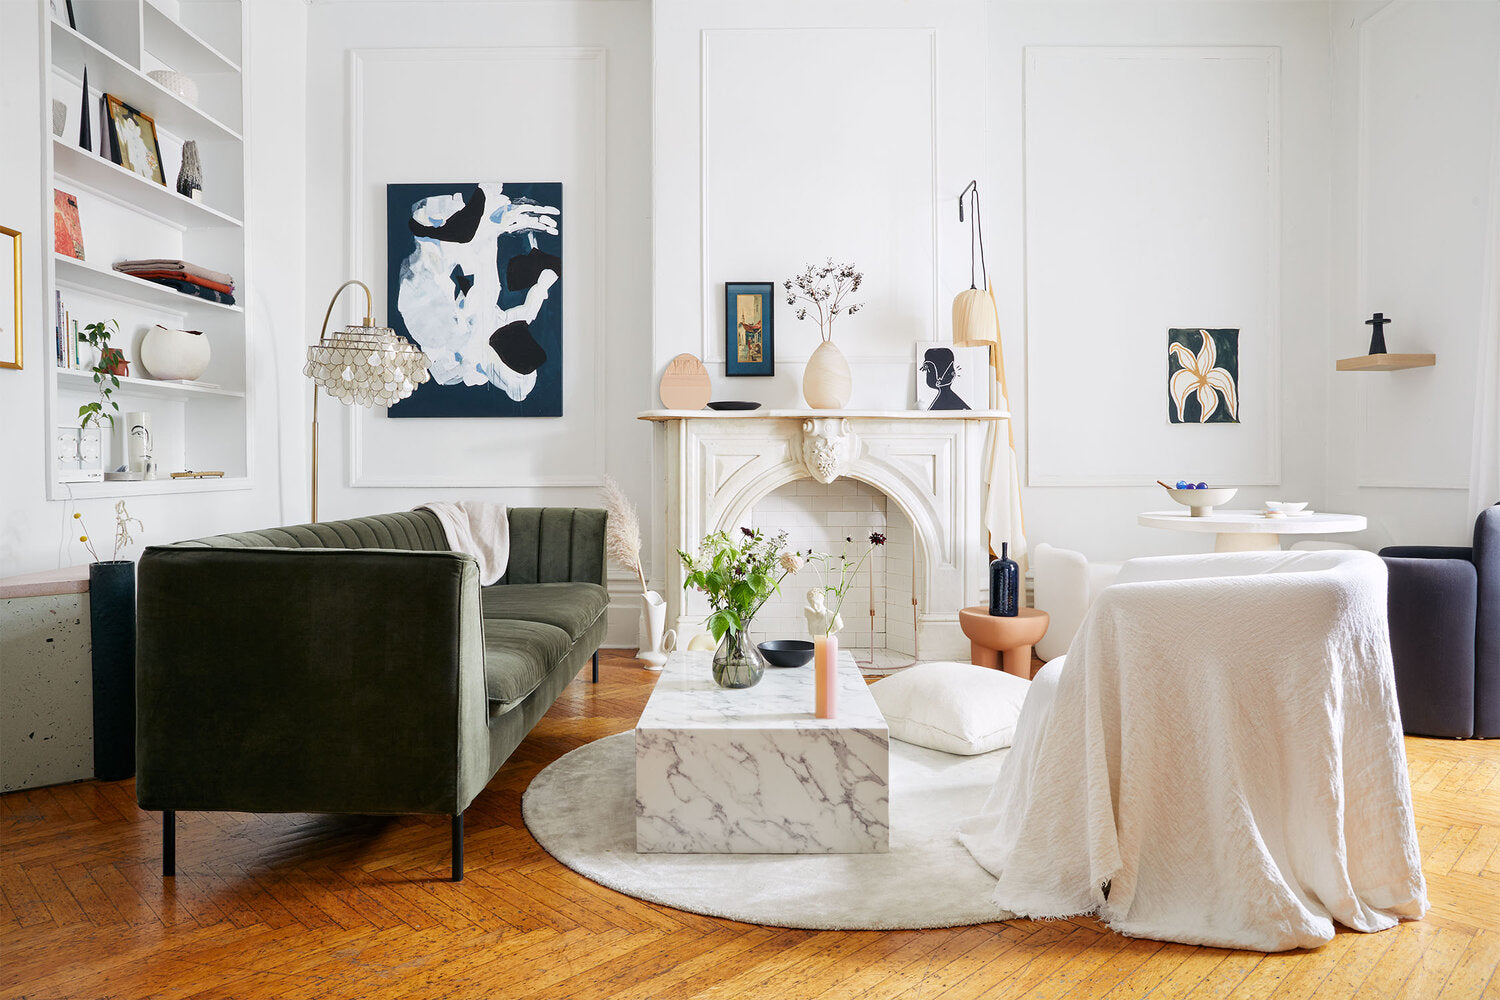 3 Saardé Collections for an Art Deco Inspired Interior